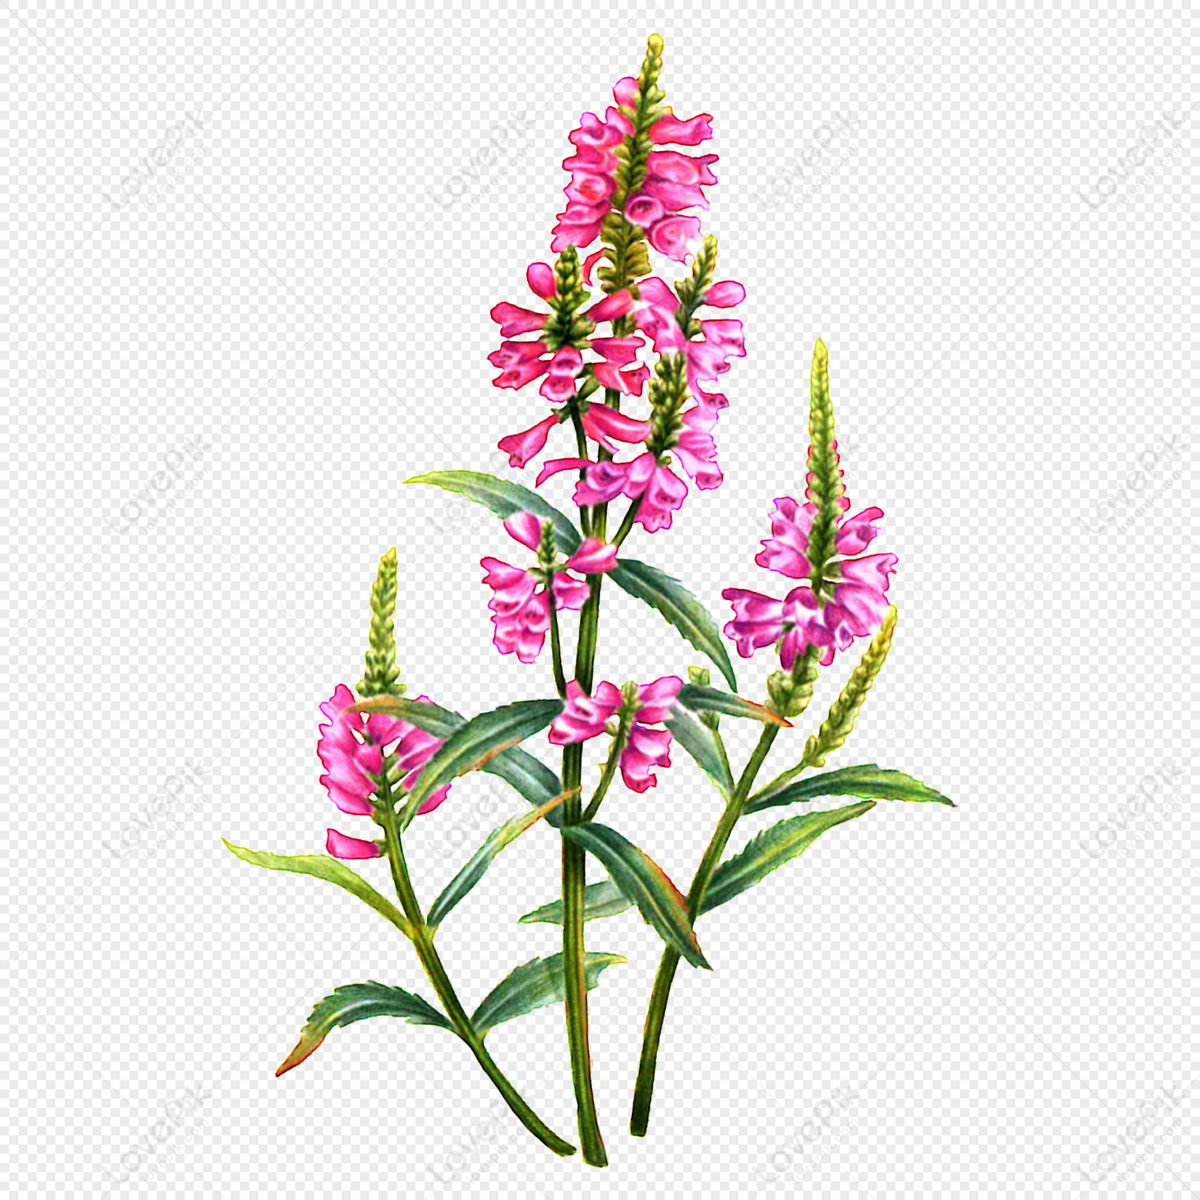 Pink Wildflowers PNG White Transparent And Clipart Image For Free Download  - Lovepik | 401444192